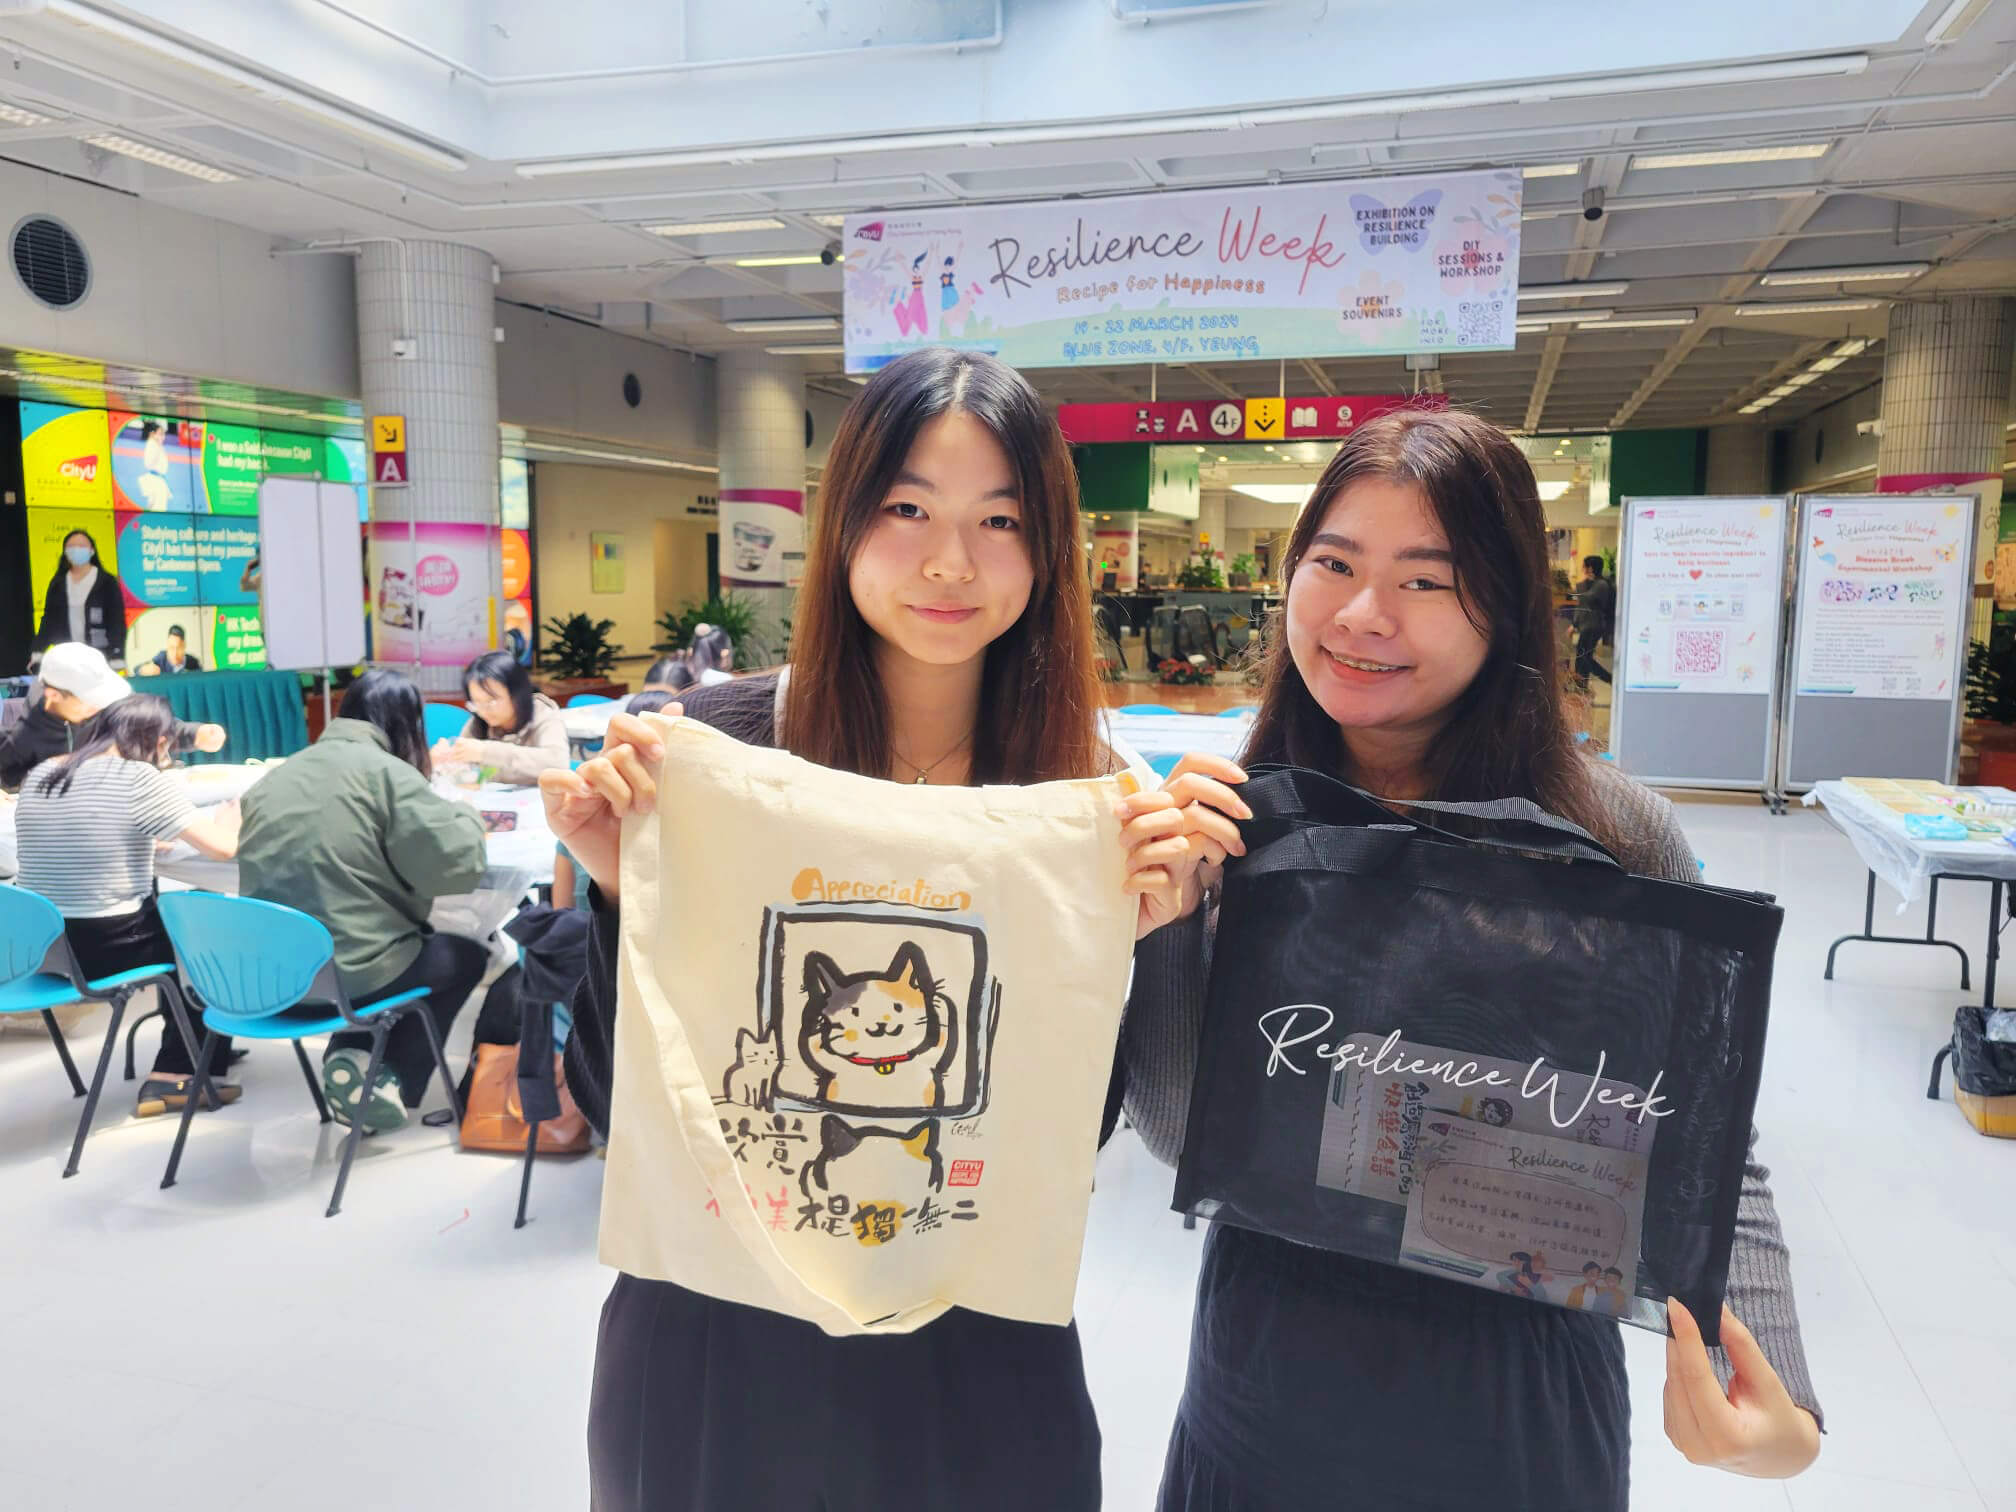 Students received a toolkit by participating in an activity focused on promoting gratitude and appreciation. These toolkits included one of two unique styles of tote bags and tips for fostering resilience.